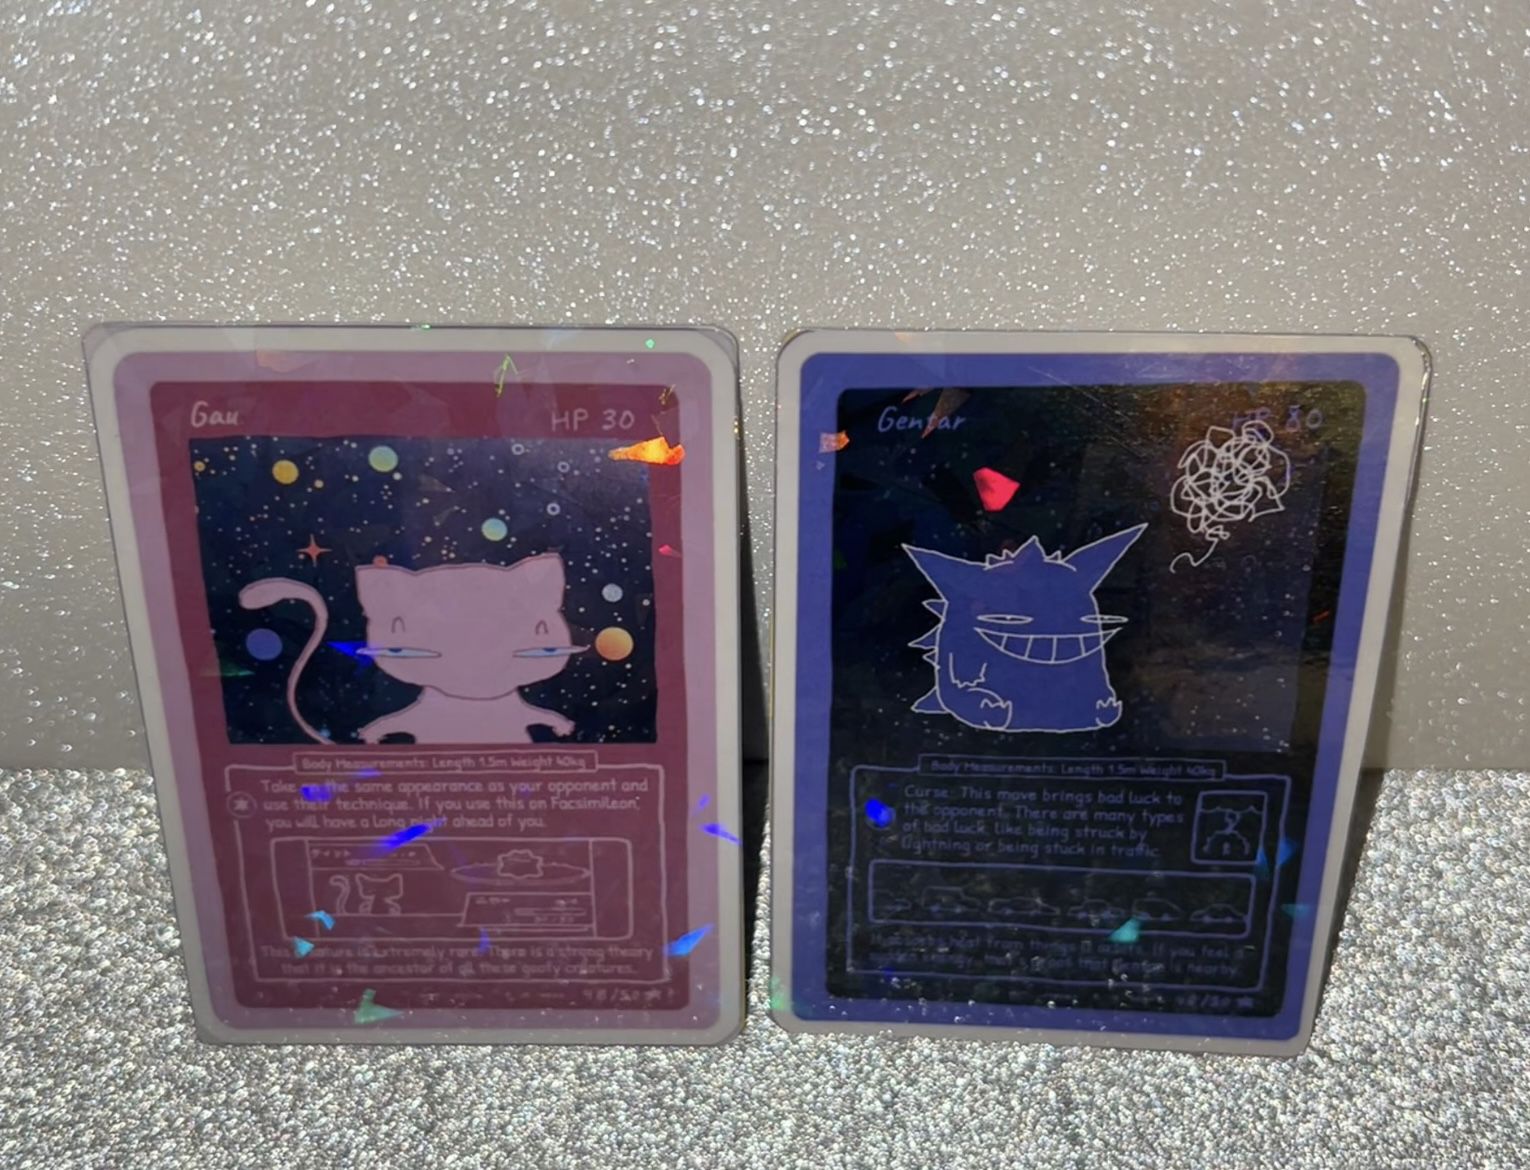 New And Gengar Pokemon Card Ultra Rare Holographic Collectible 